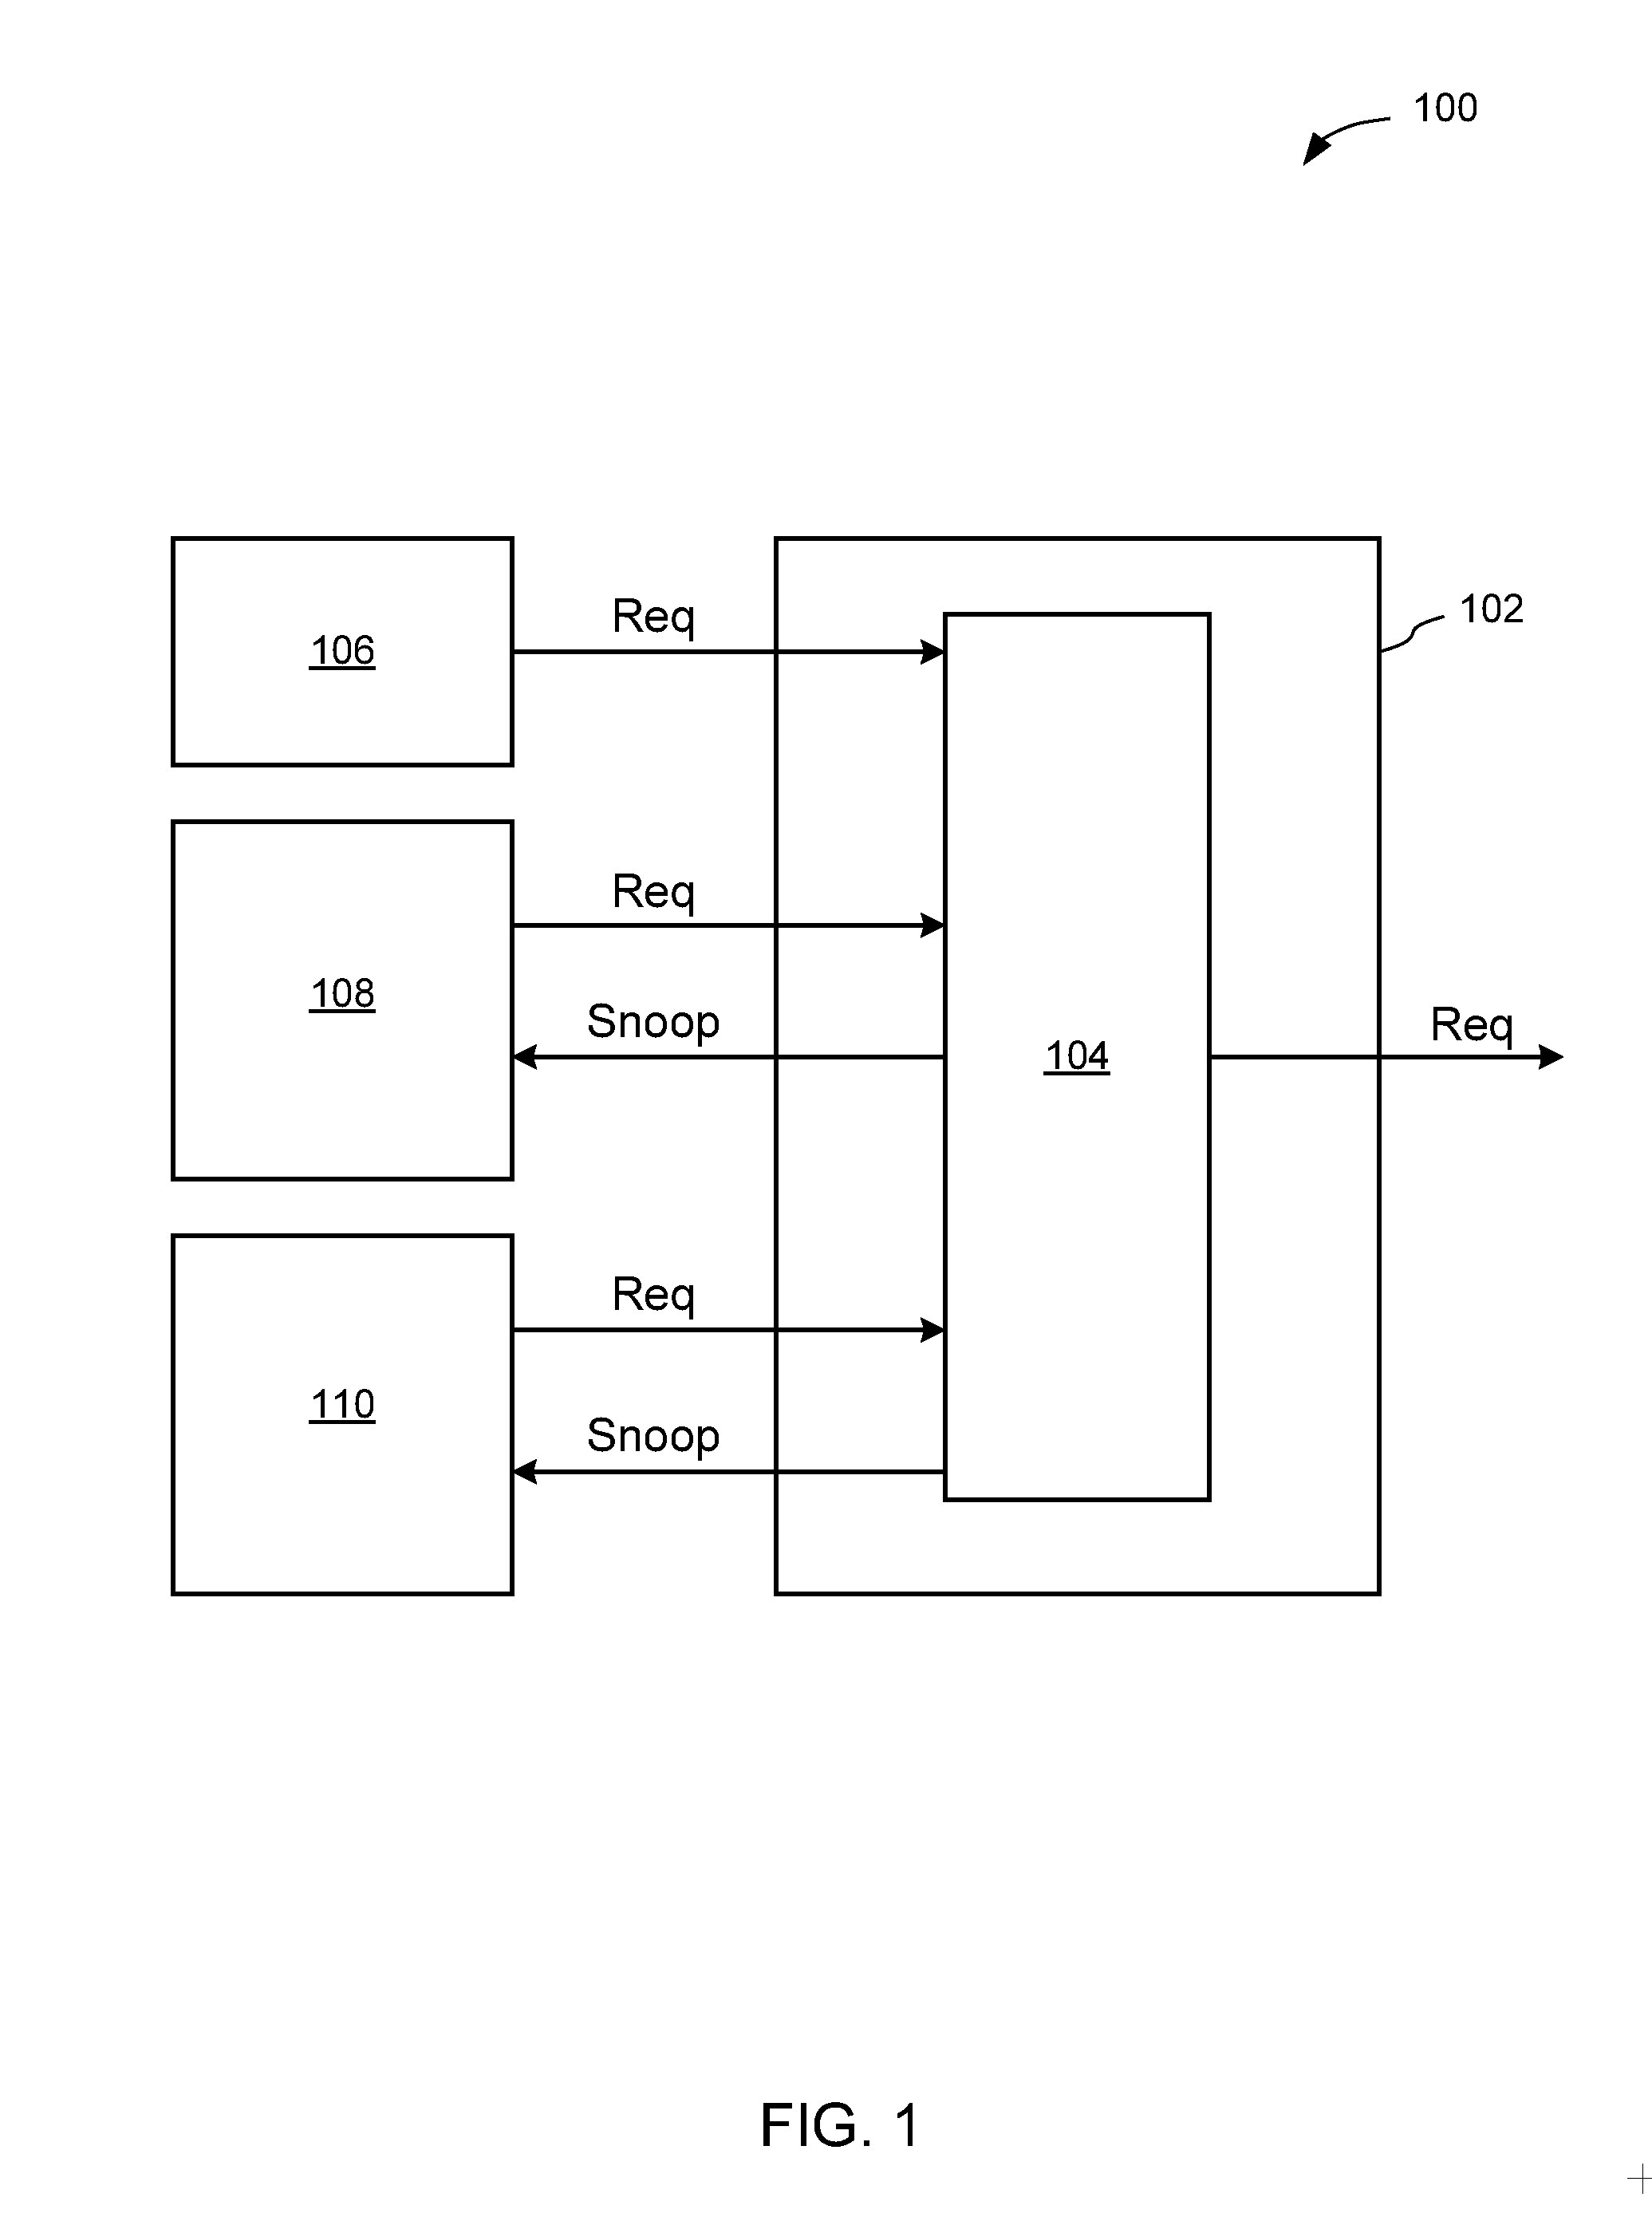 Simplified controller with partial coherency